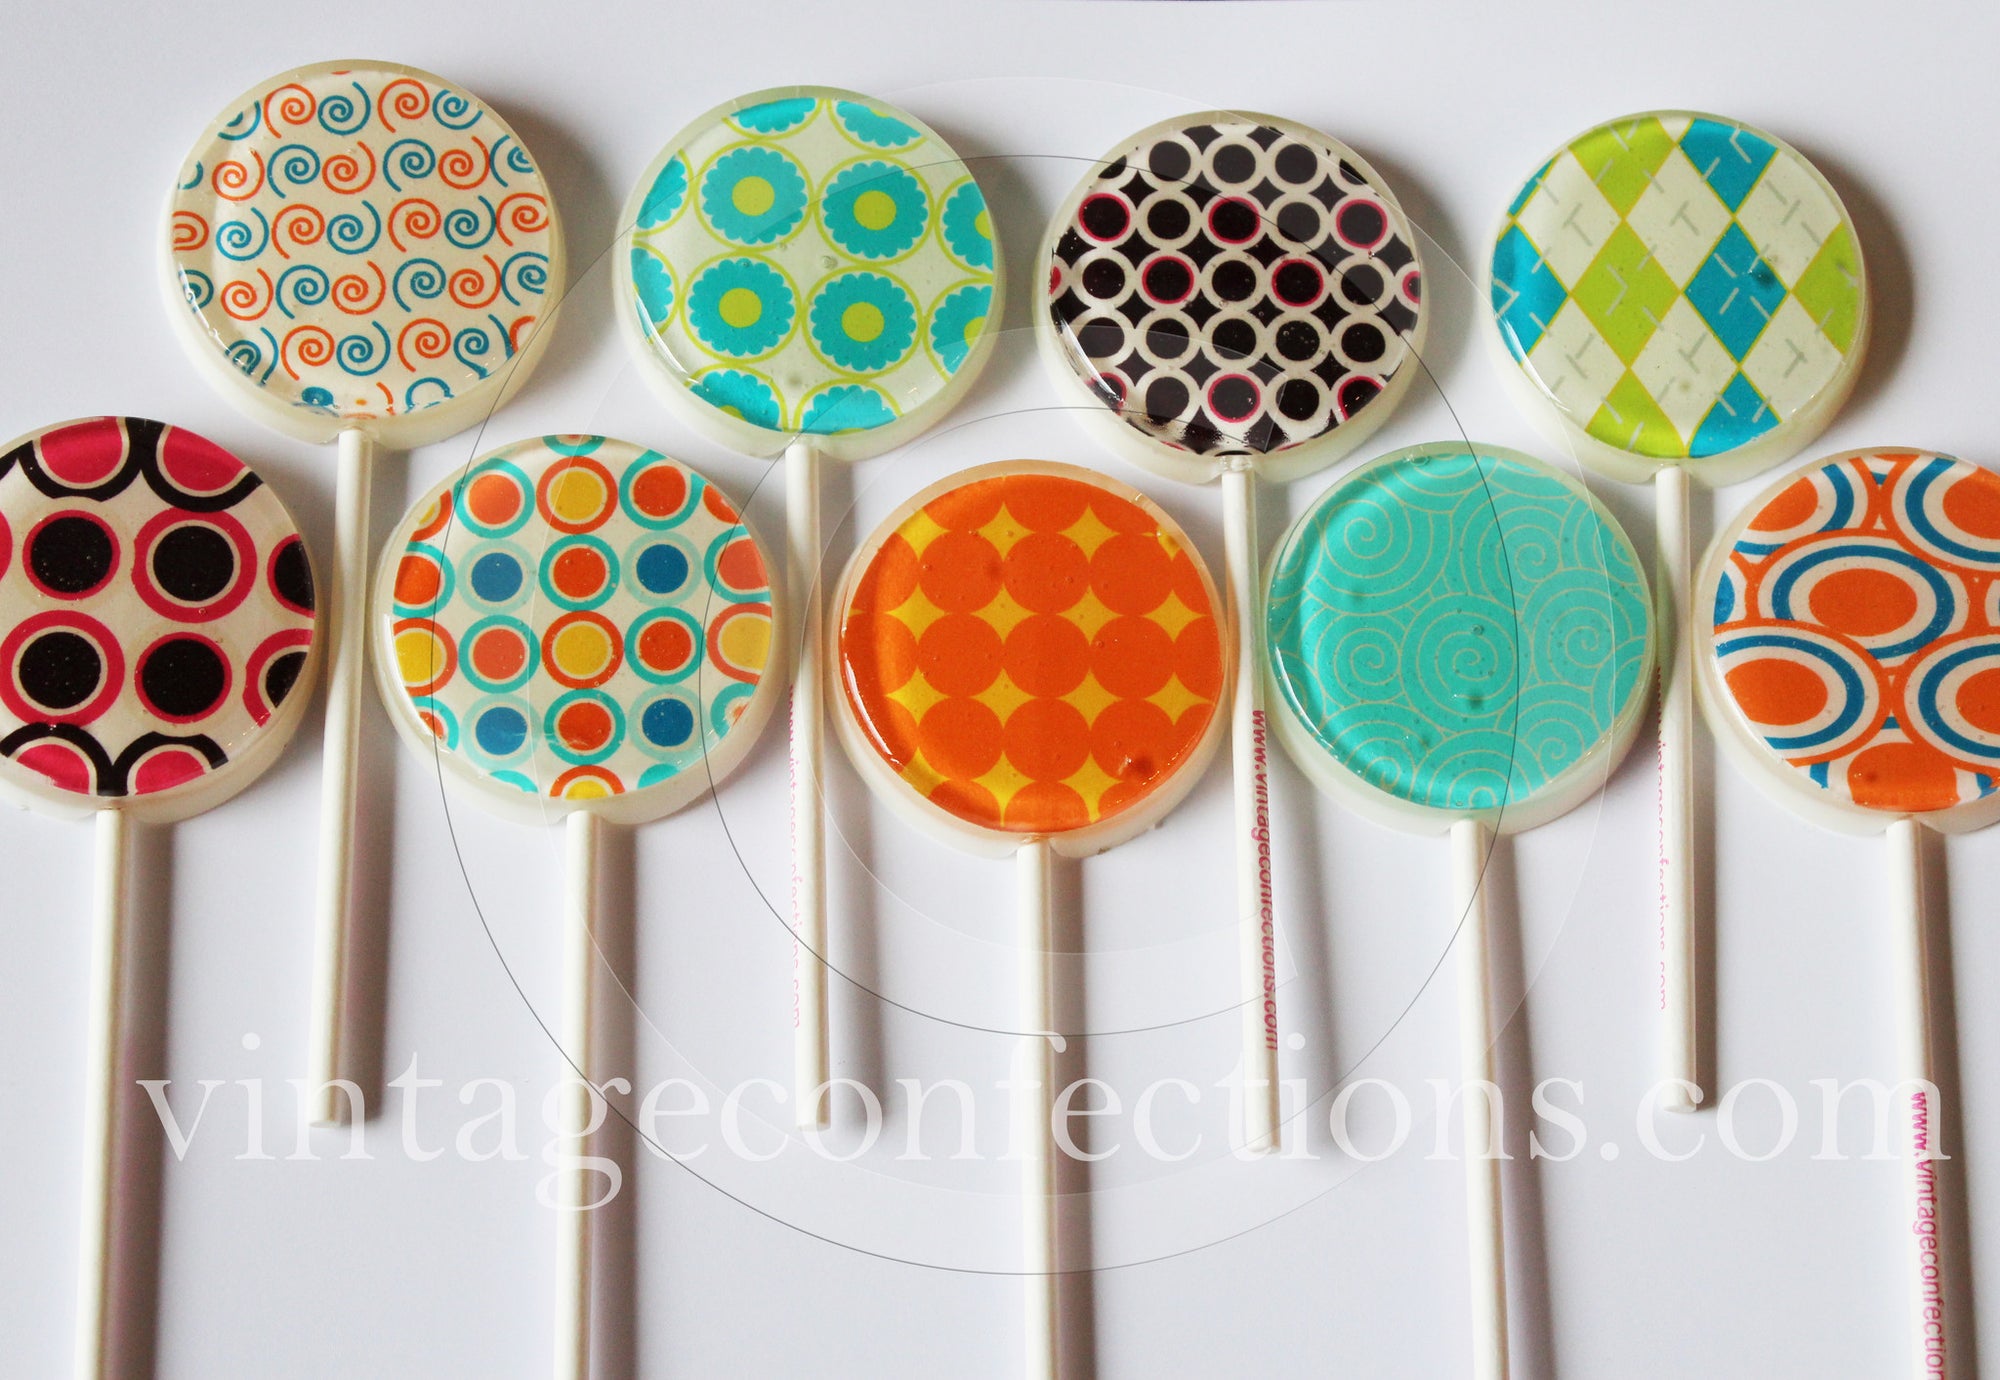 Groovy Baby Lollipops 5-piece set by I Want Candy!